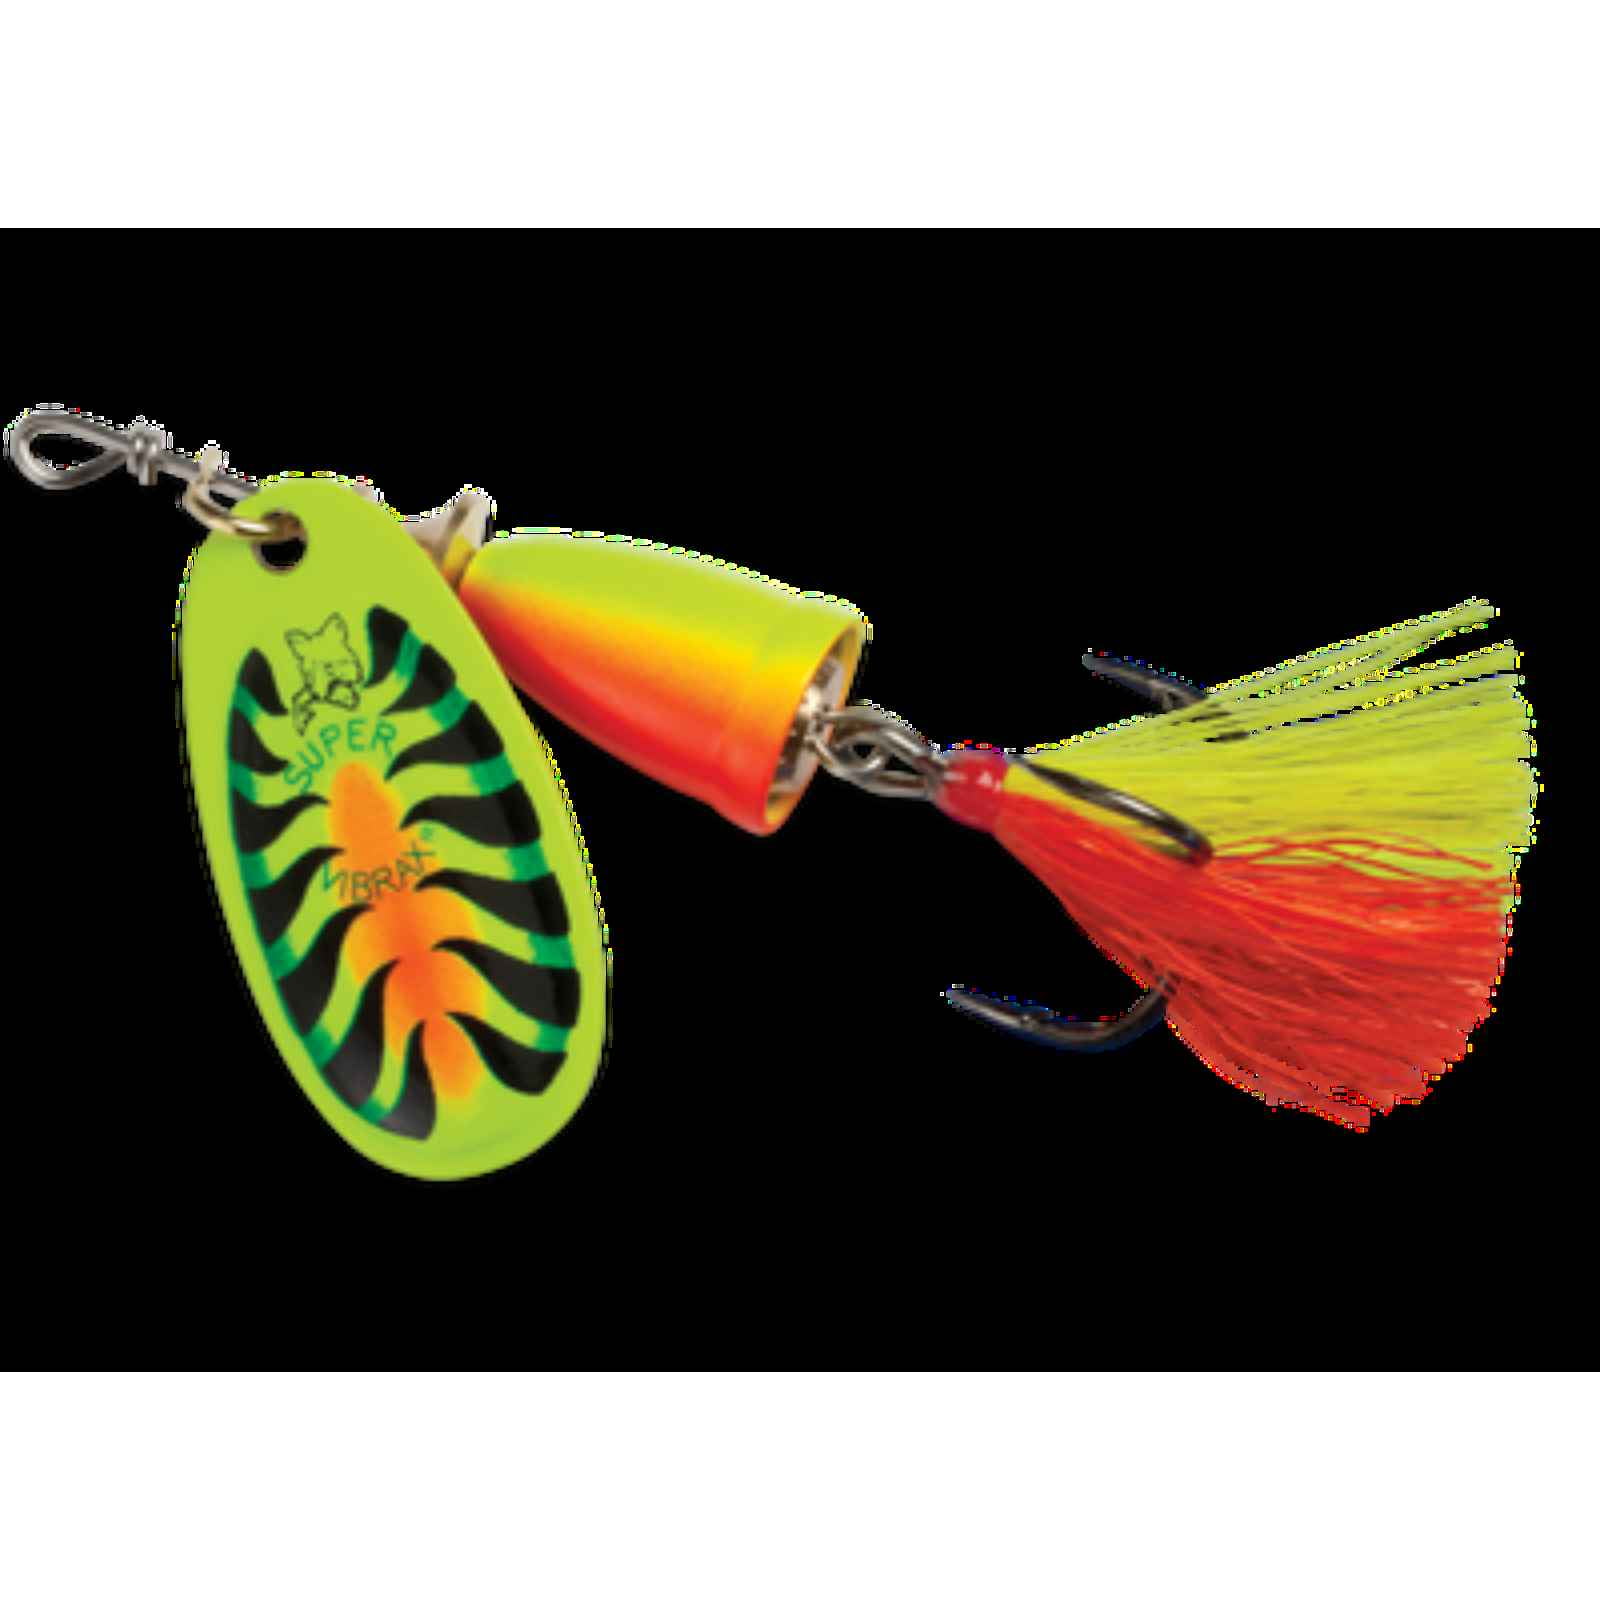 VMC Rattle Spoon 1 1/2" 1/4 oz RTS14-YP Yellow Perch Ice Fishing Lure 